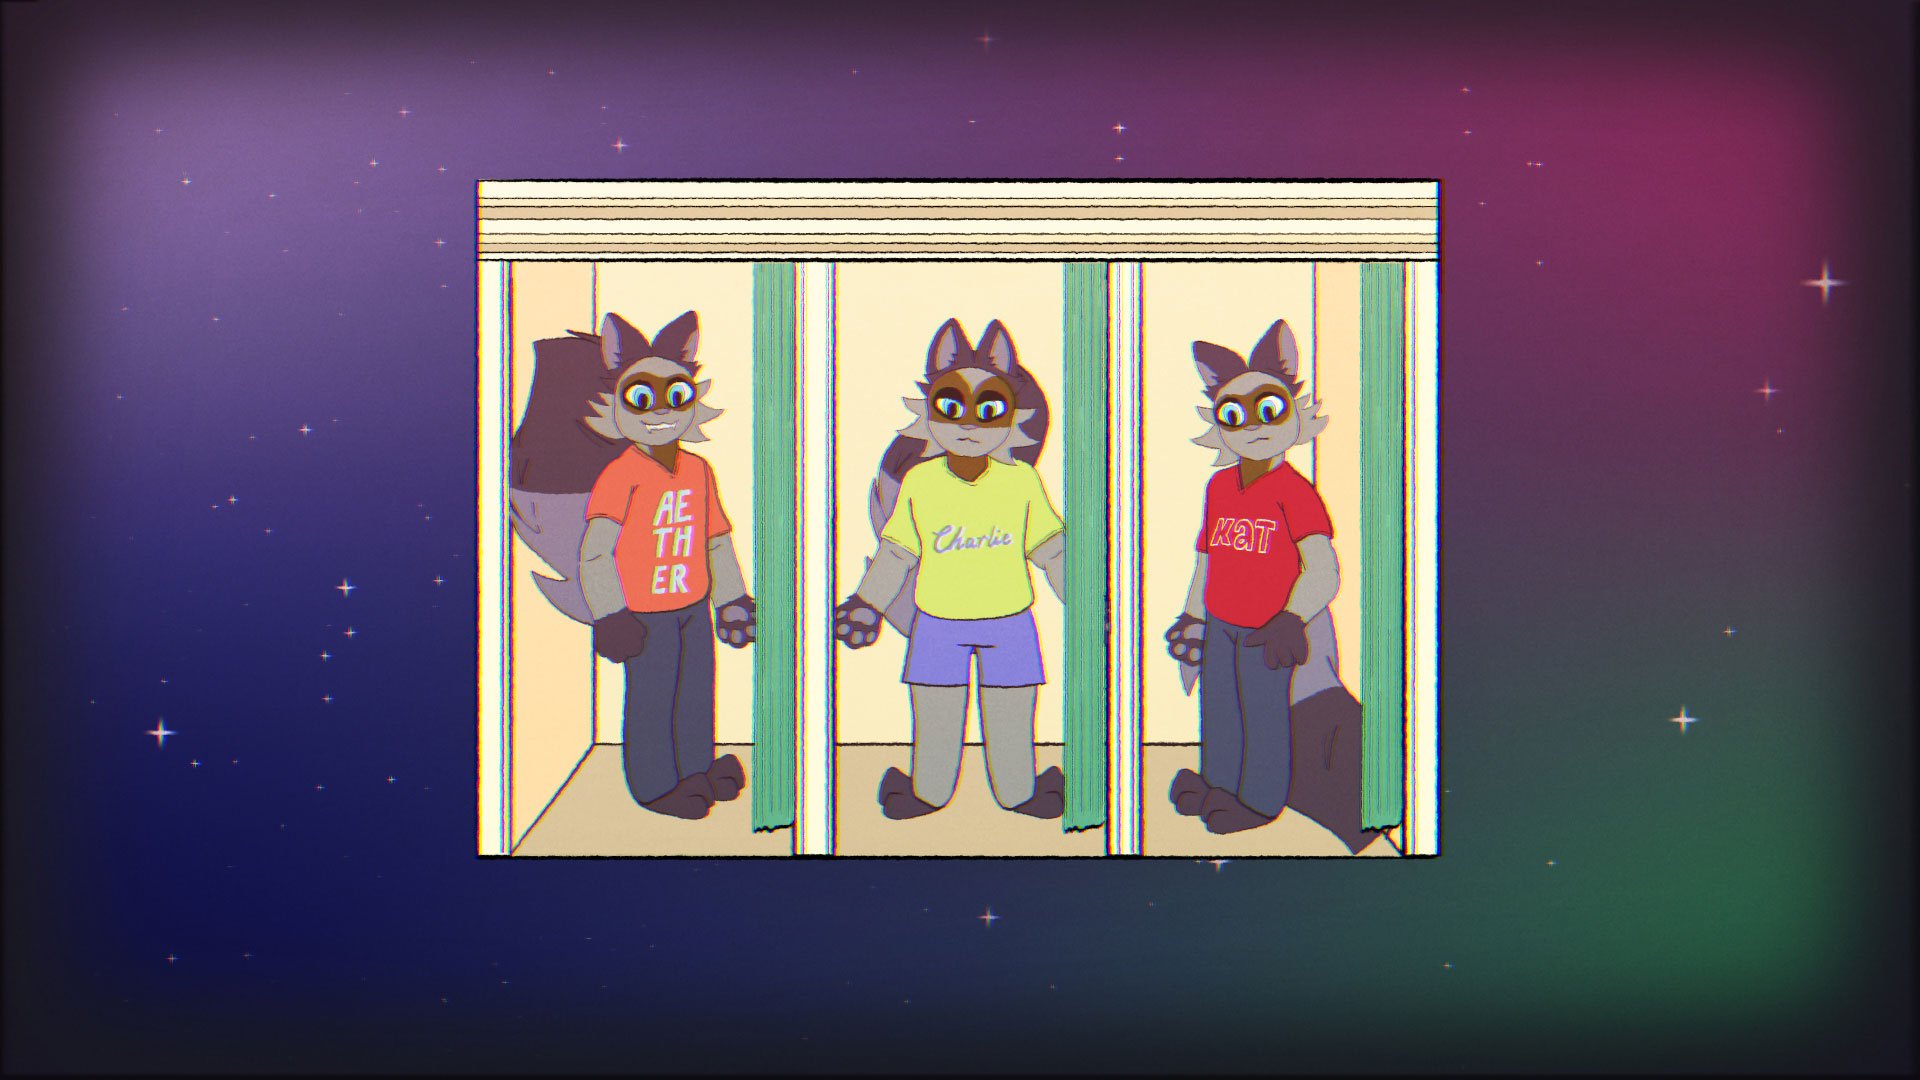 The Fallens animated character Mimosa in a changing room trying on three different t-shirts that each have different names printed on them: Aether, Charlie and Kat (Copy)